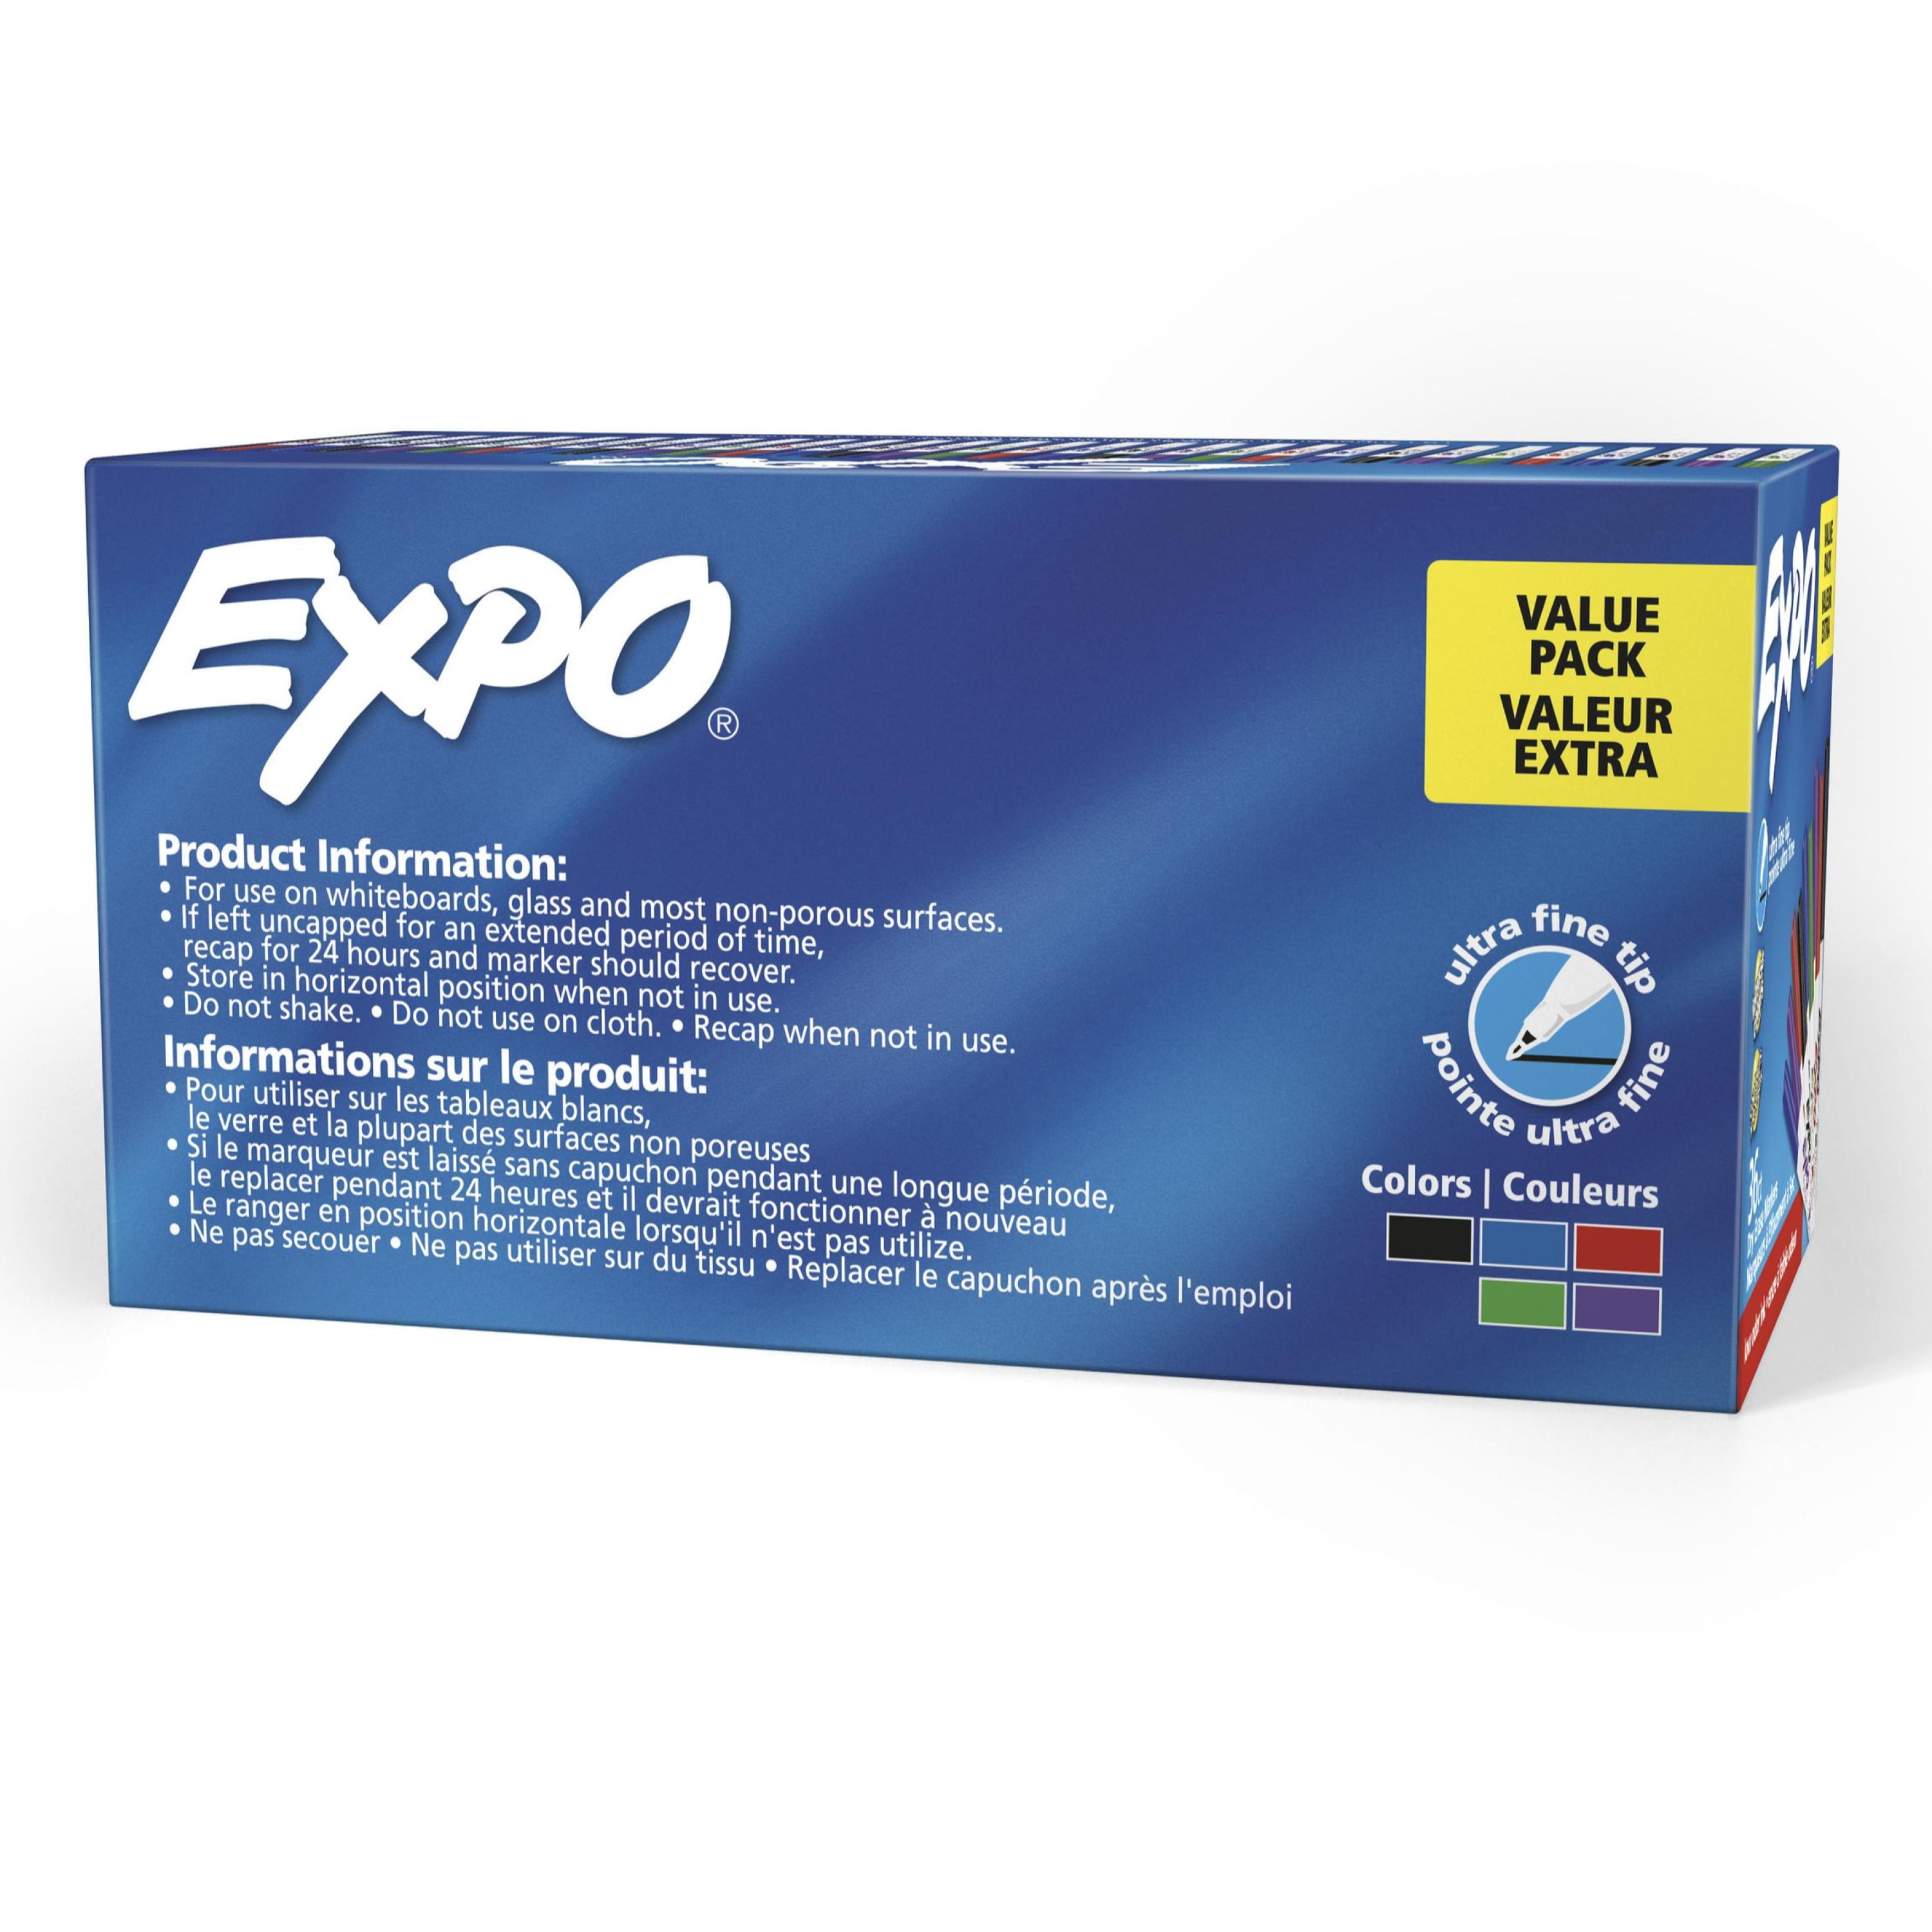 Expo® Low Odor Fine Tip Dry Erase Markers - Assorted Colors, 1 ct